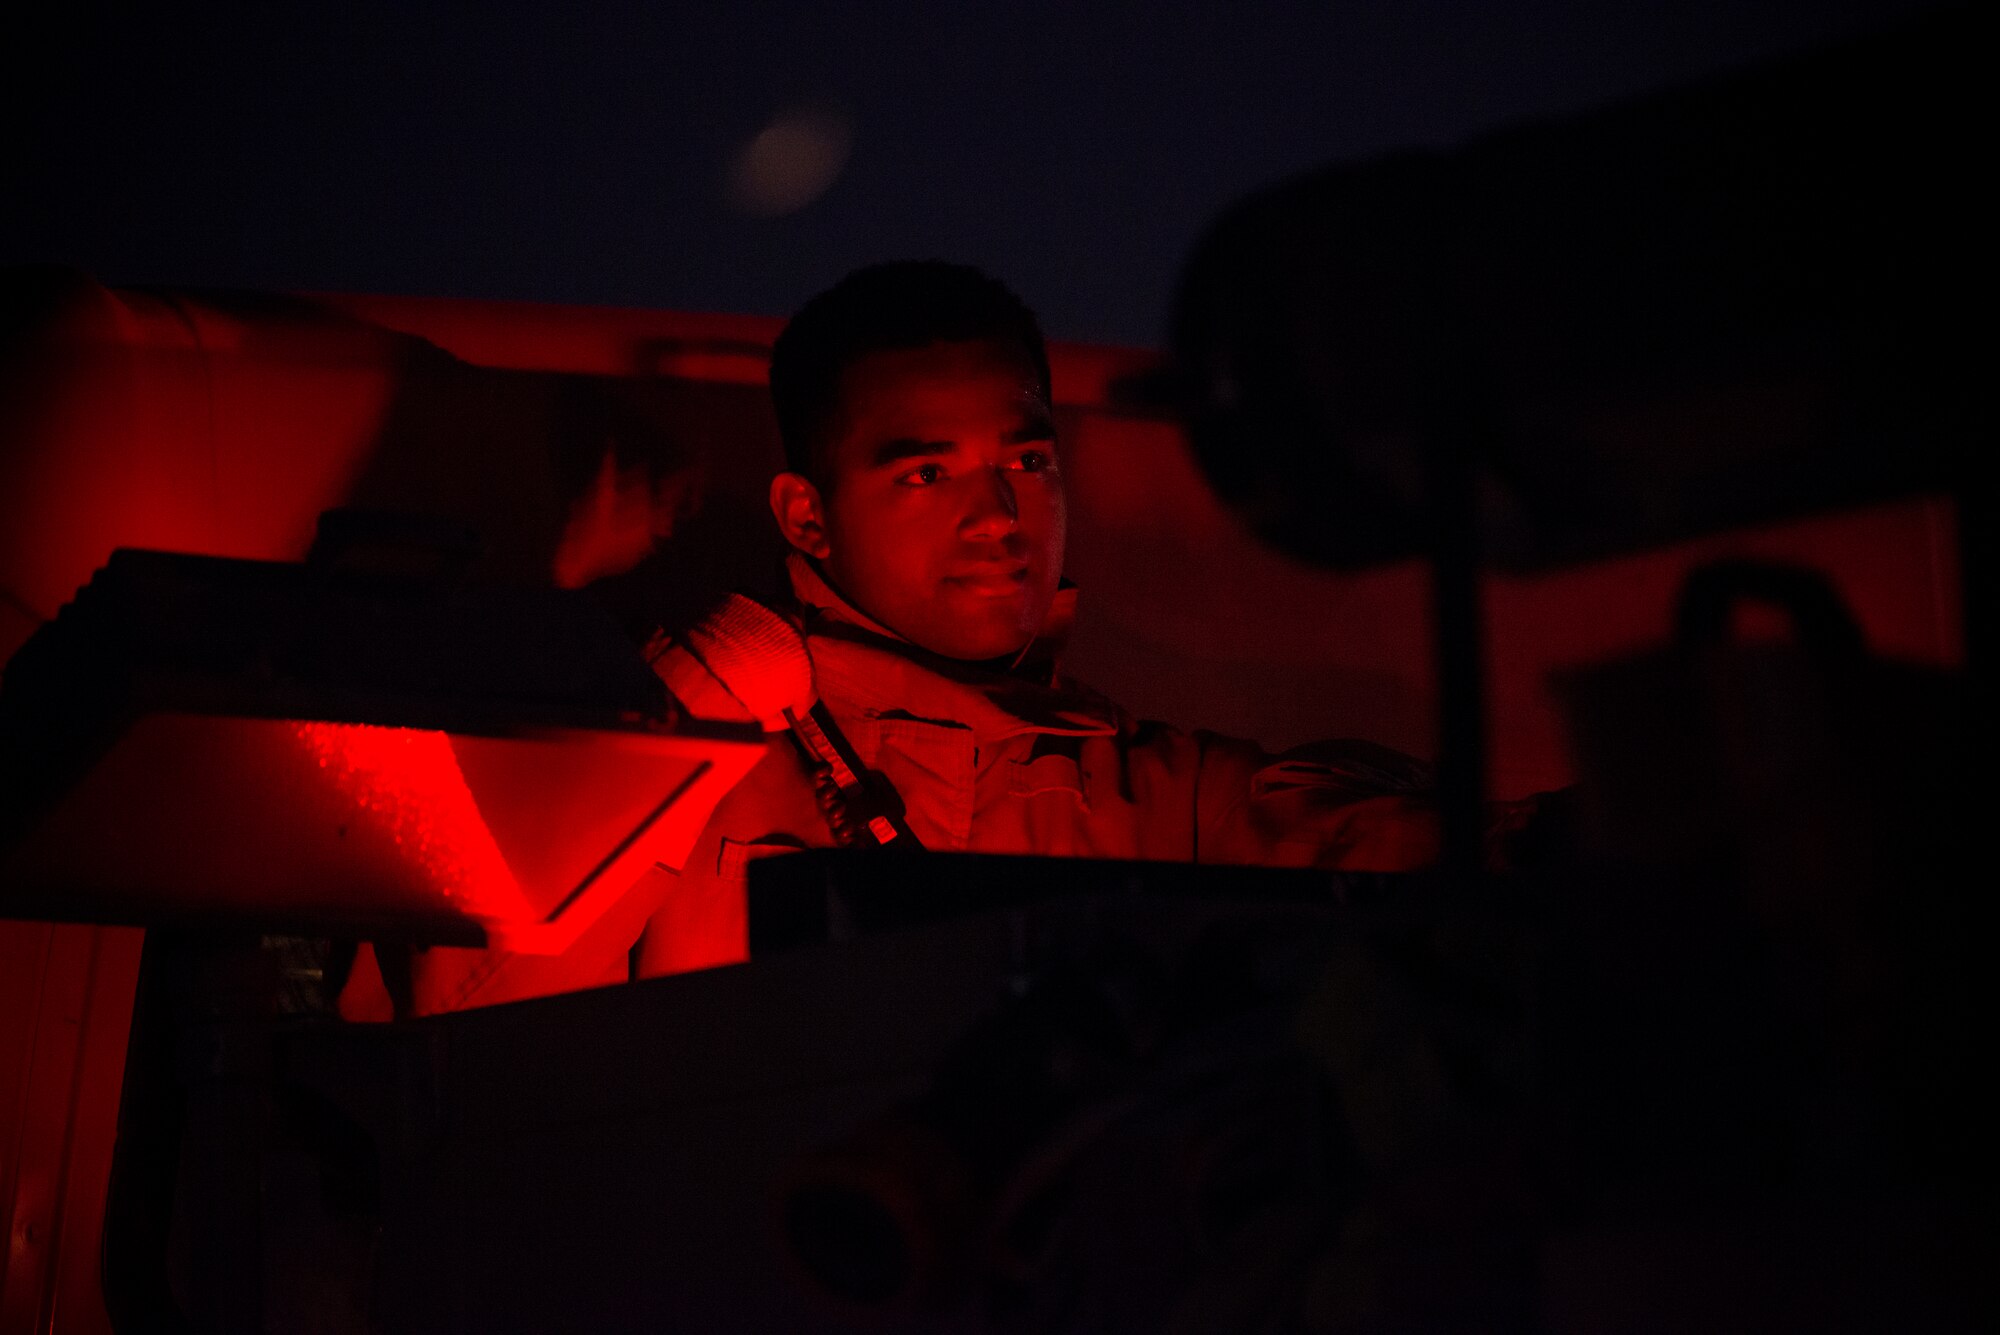 Airman 1st Class Matthew Bendorf, 379th Expeditionary Civil Engineer Squadron firefighter, operates a control panel on a firetruck during a training exercise August 10, 2021, at Al Udeid Air Base, Qatar.